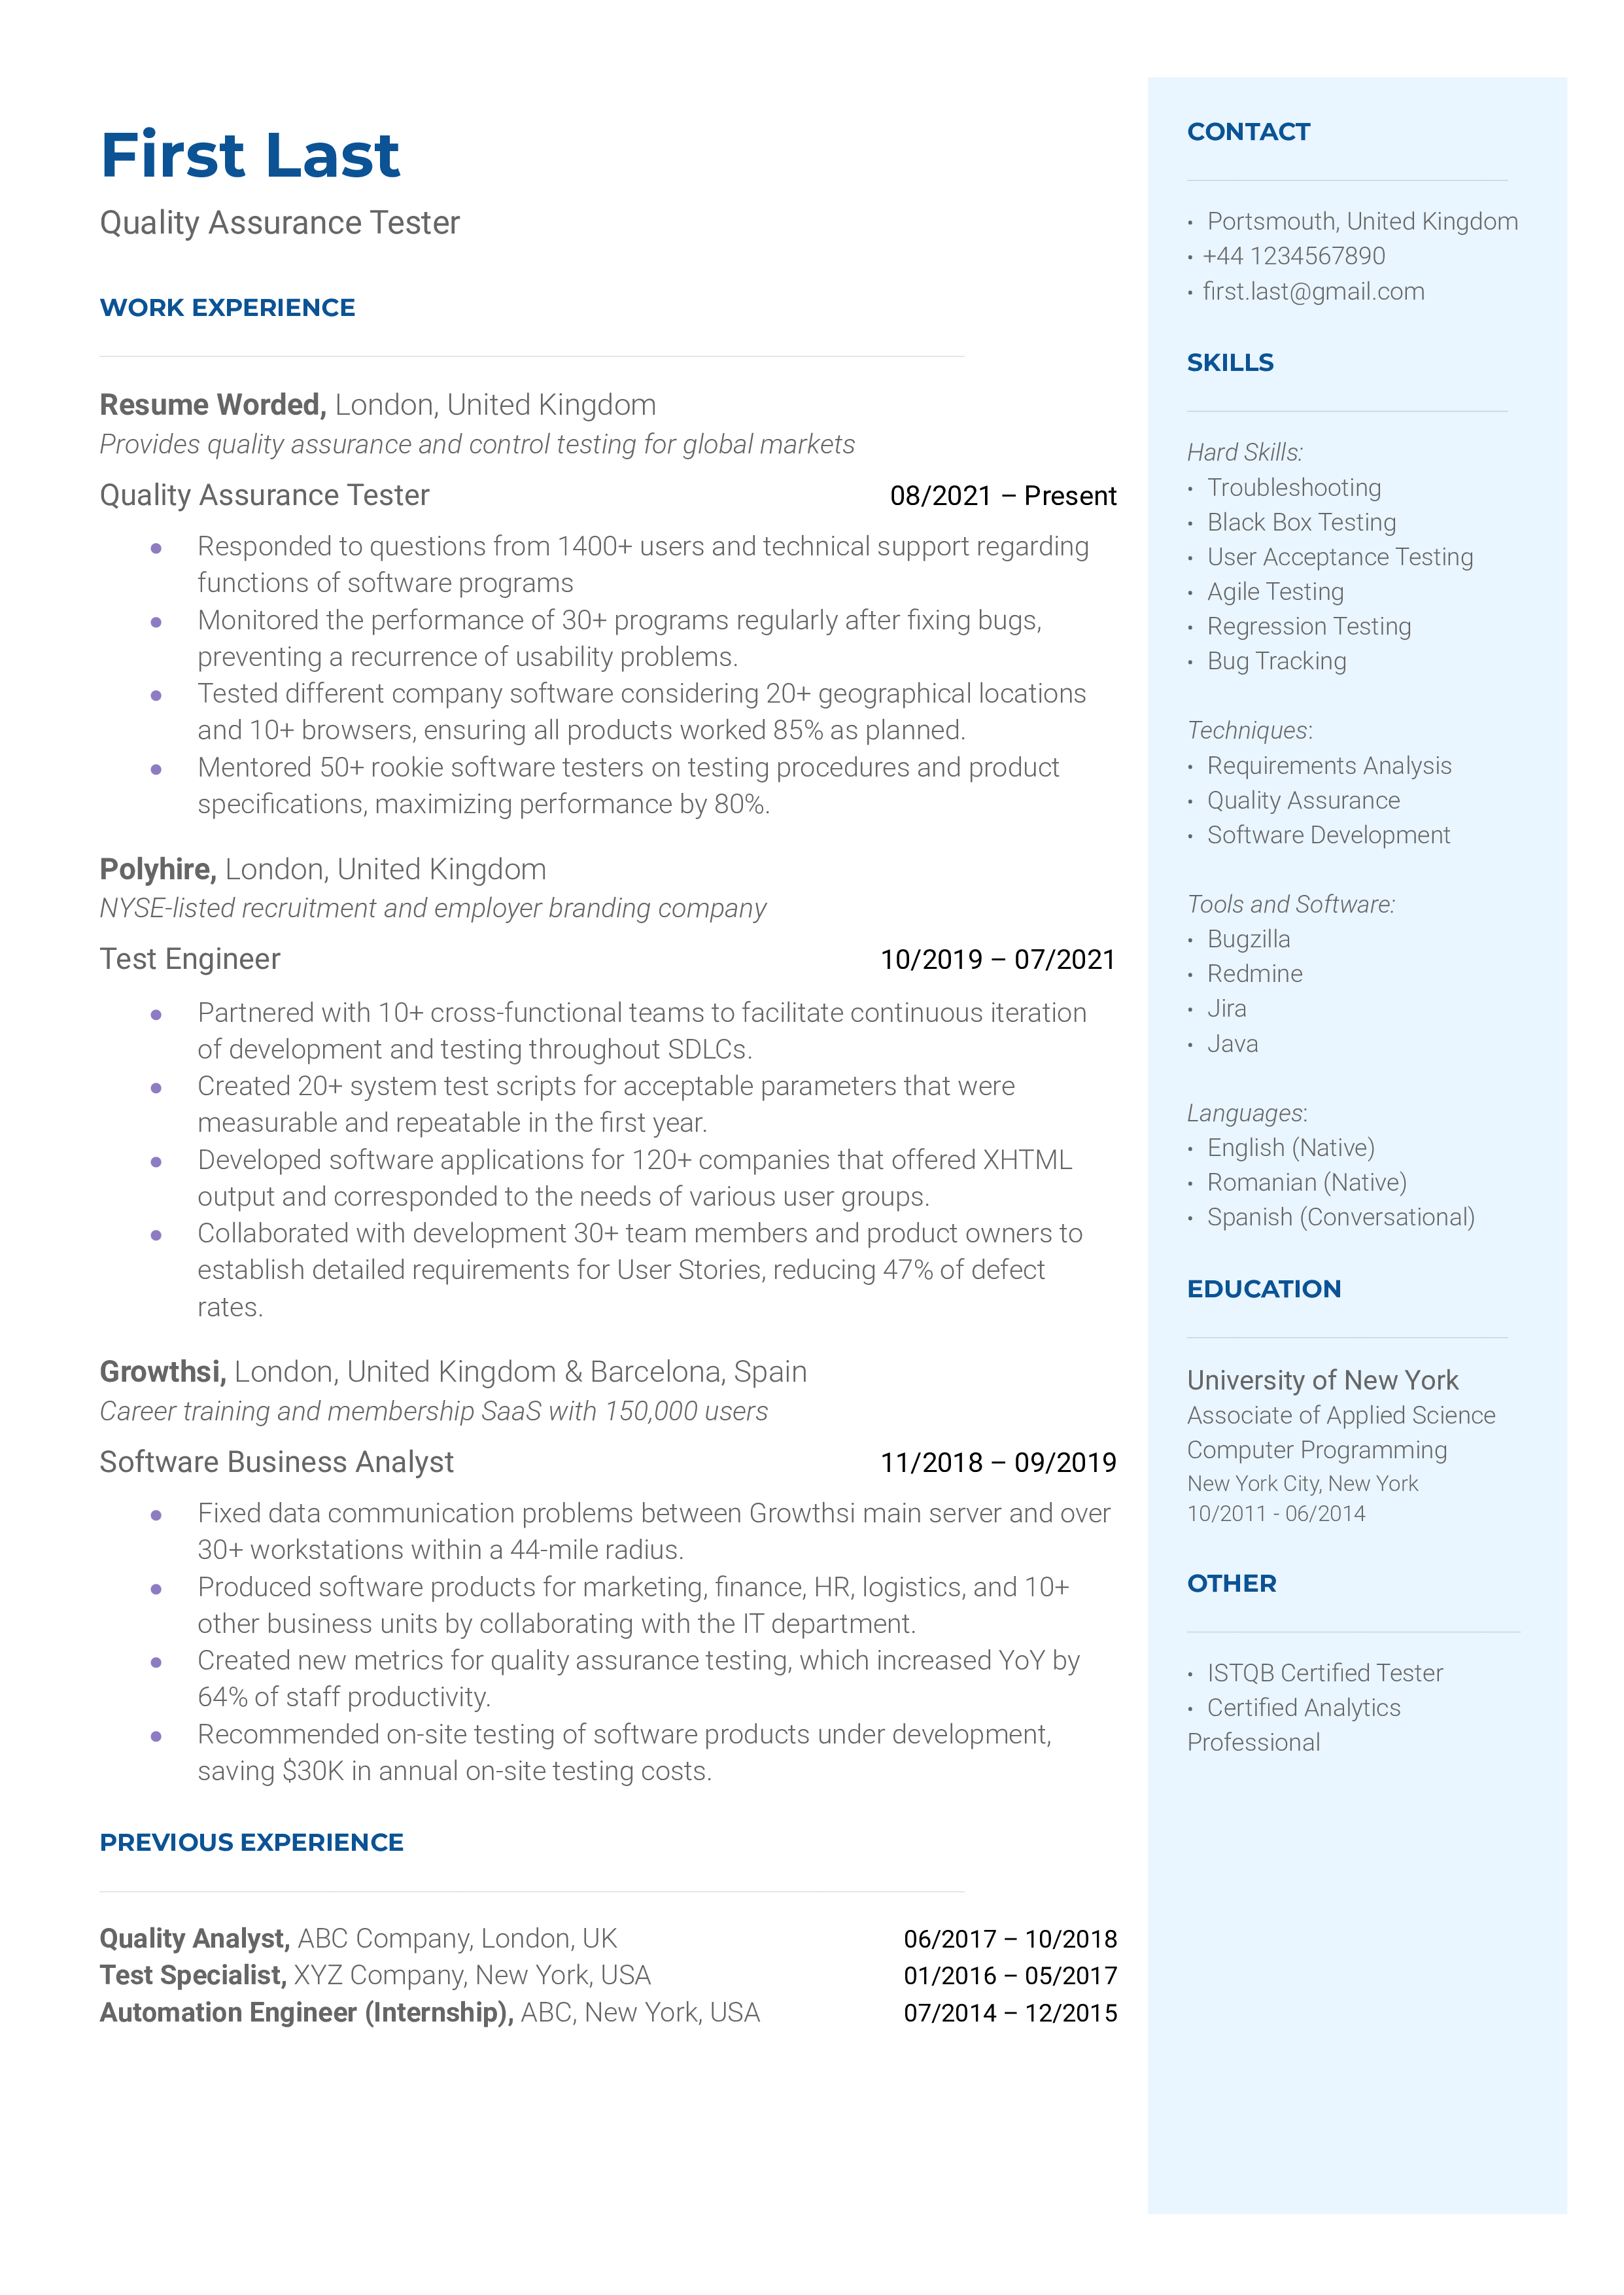 An example of a QA software tester's resume, which emphasizes key software experiences